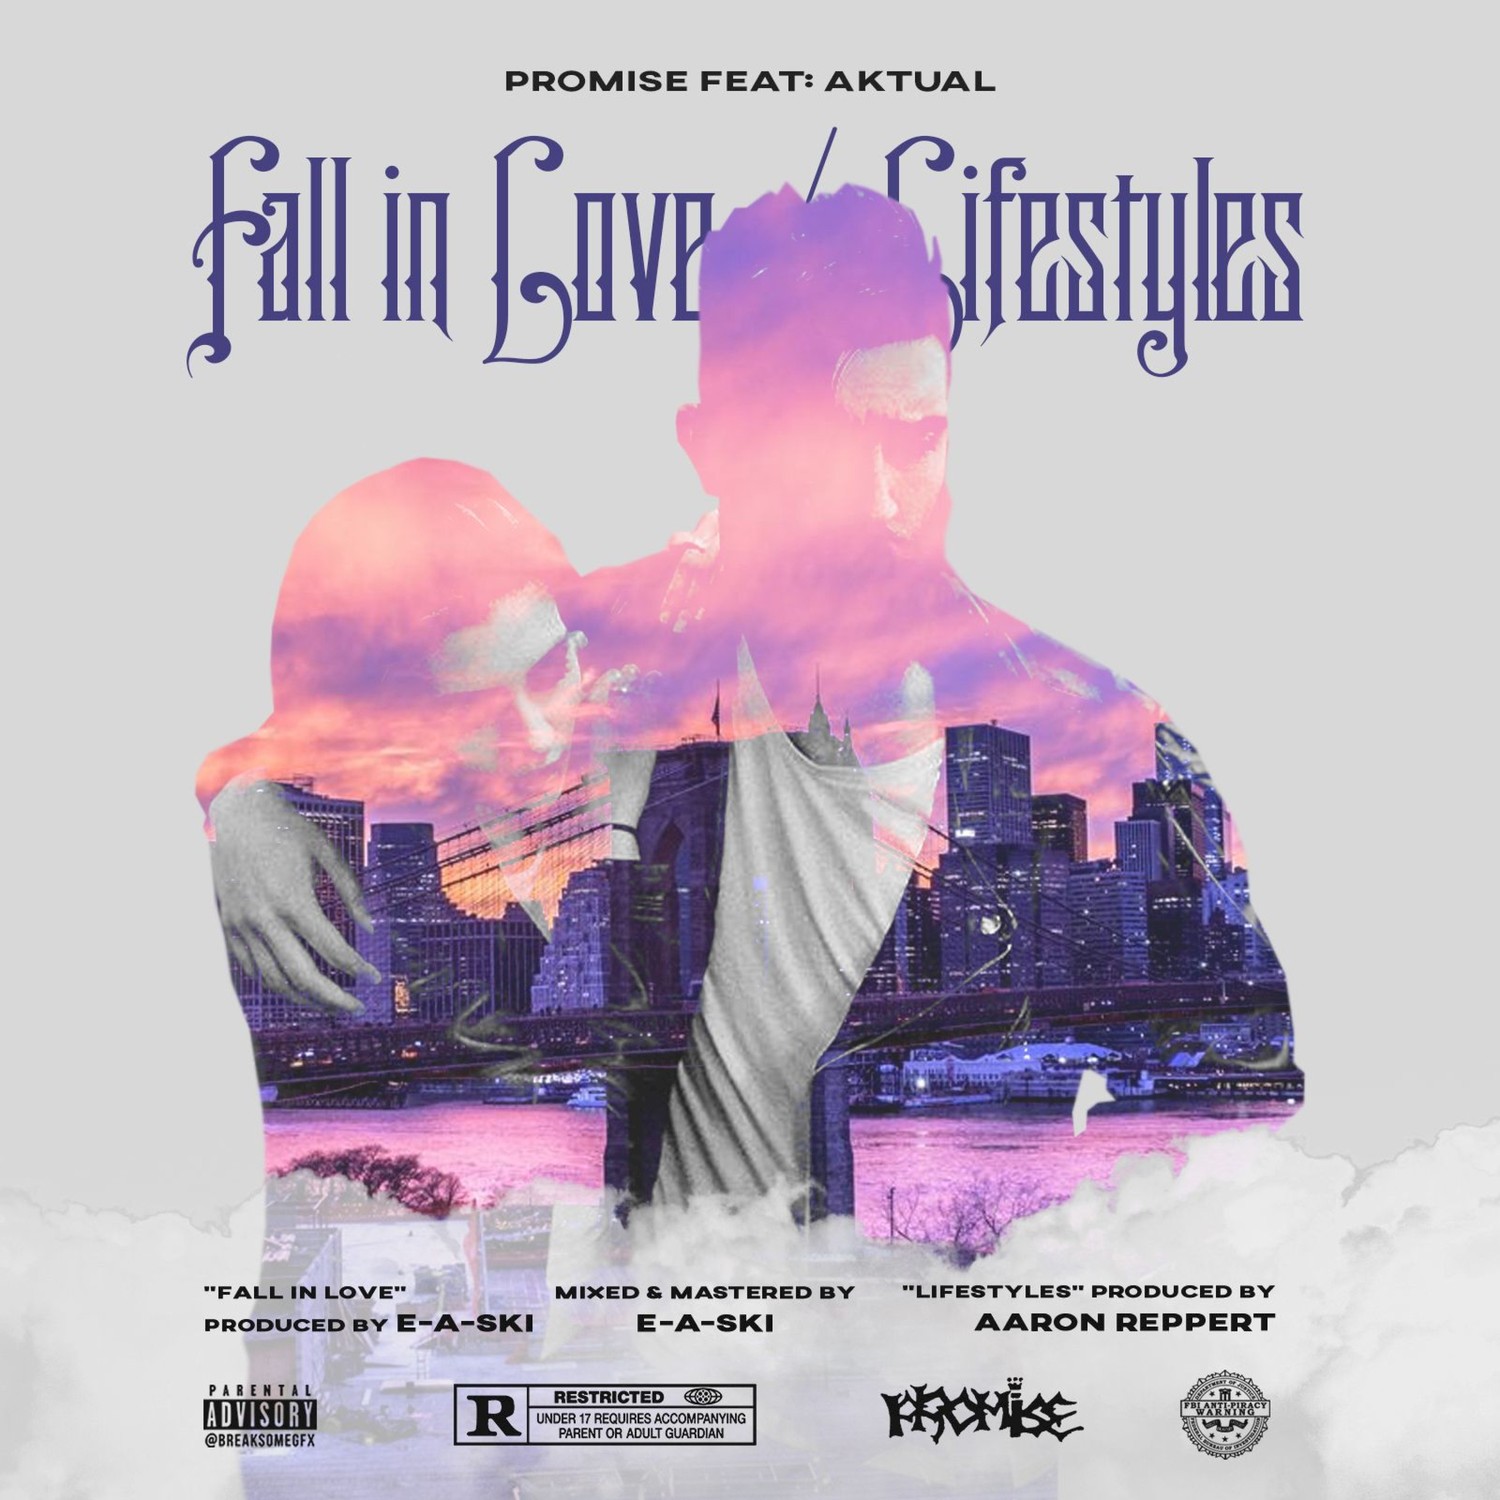 Fall in Love / Lifestyles